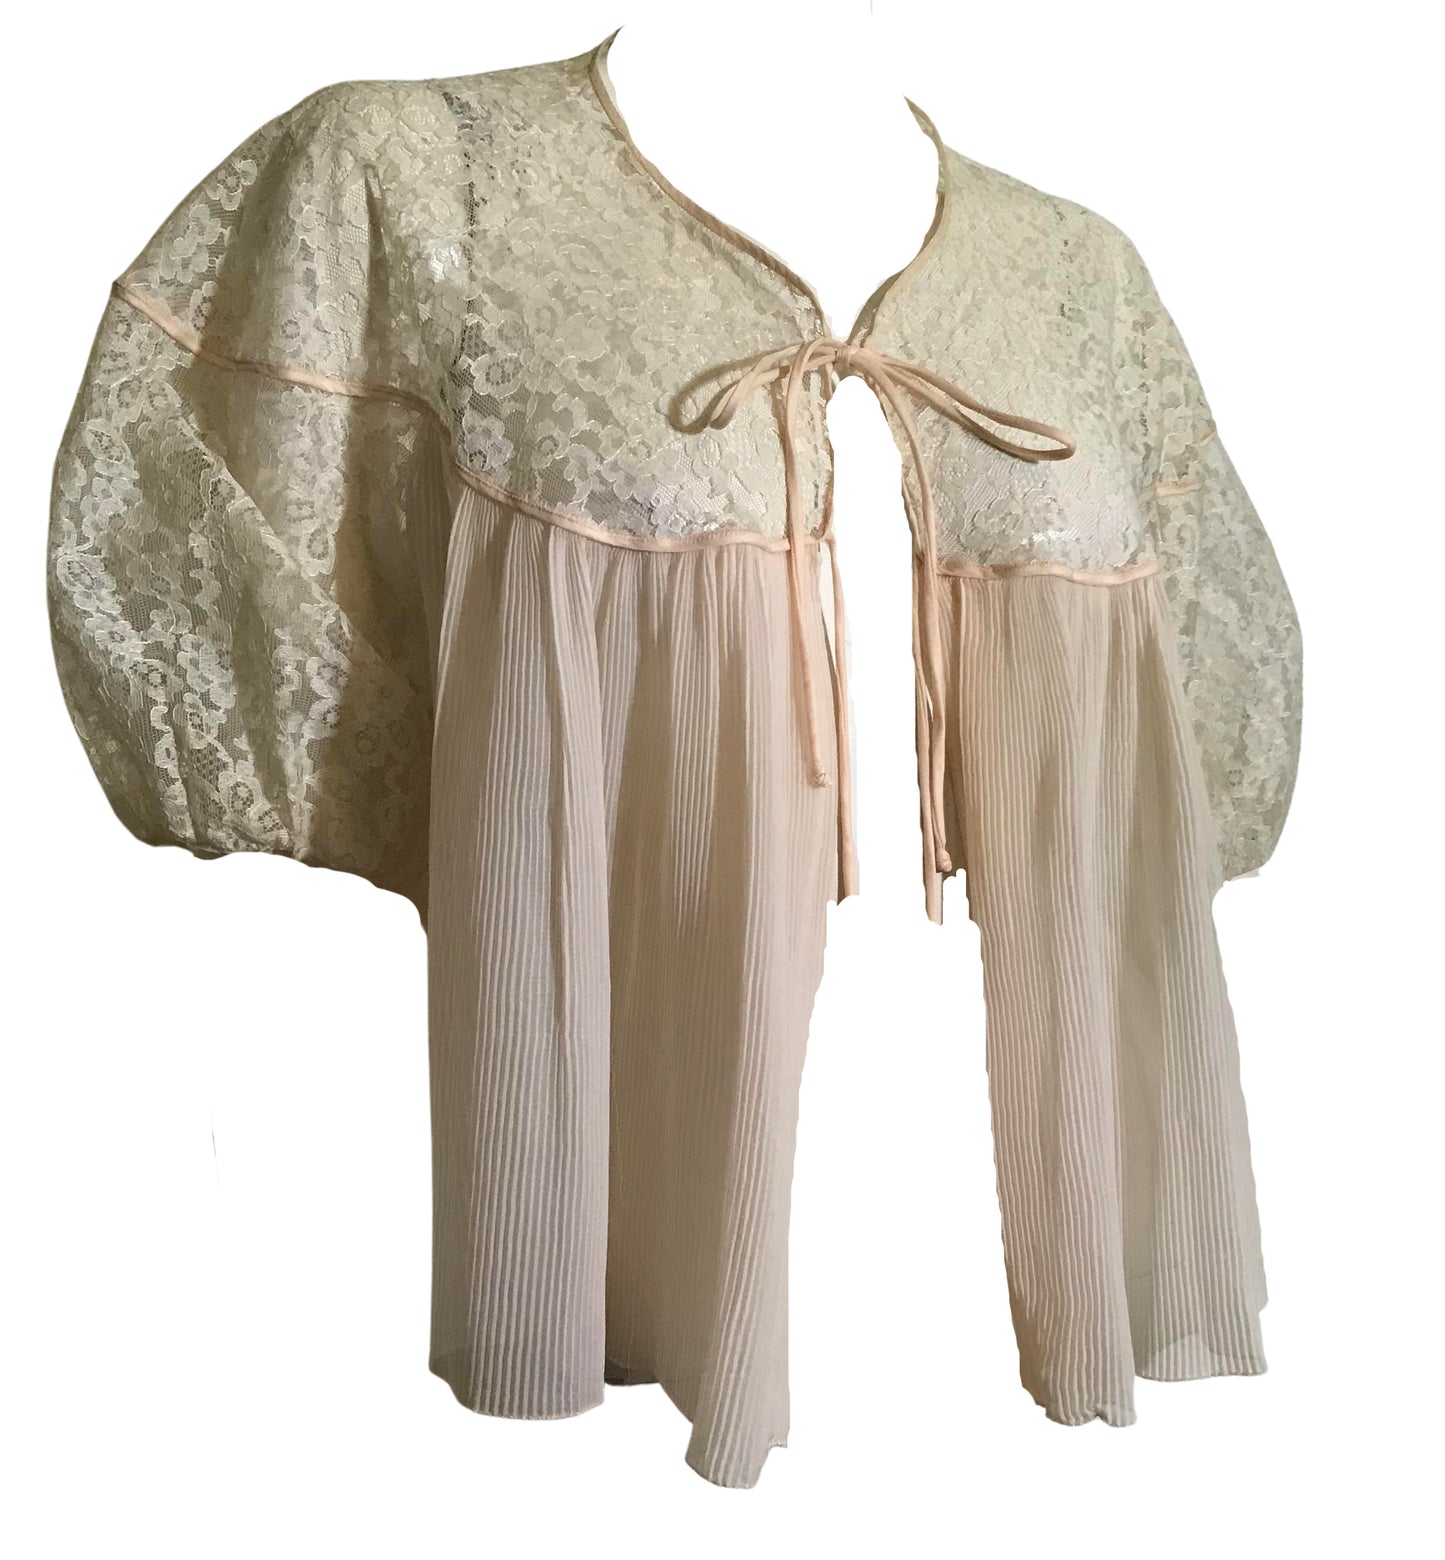 Sheer Peach Pleated Nylon Chiffon Lace Trimmed Bed Jacket circa 1950s